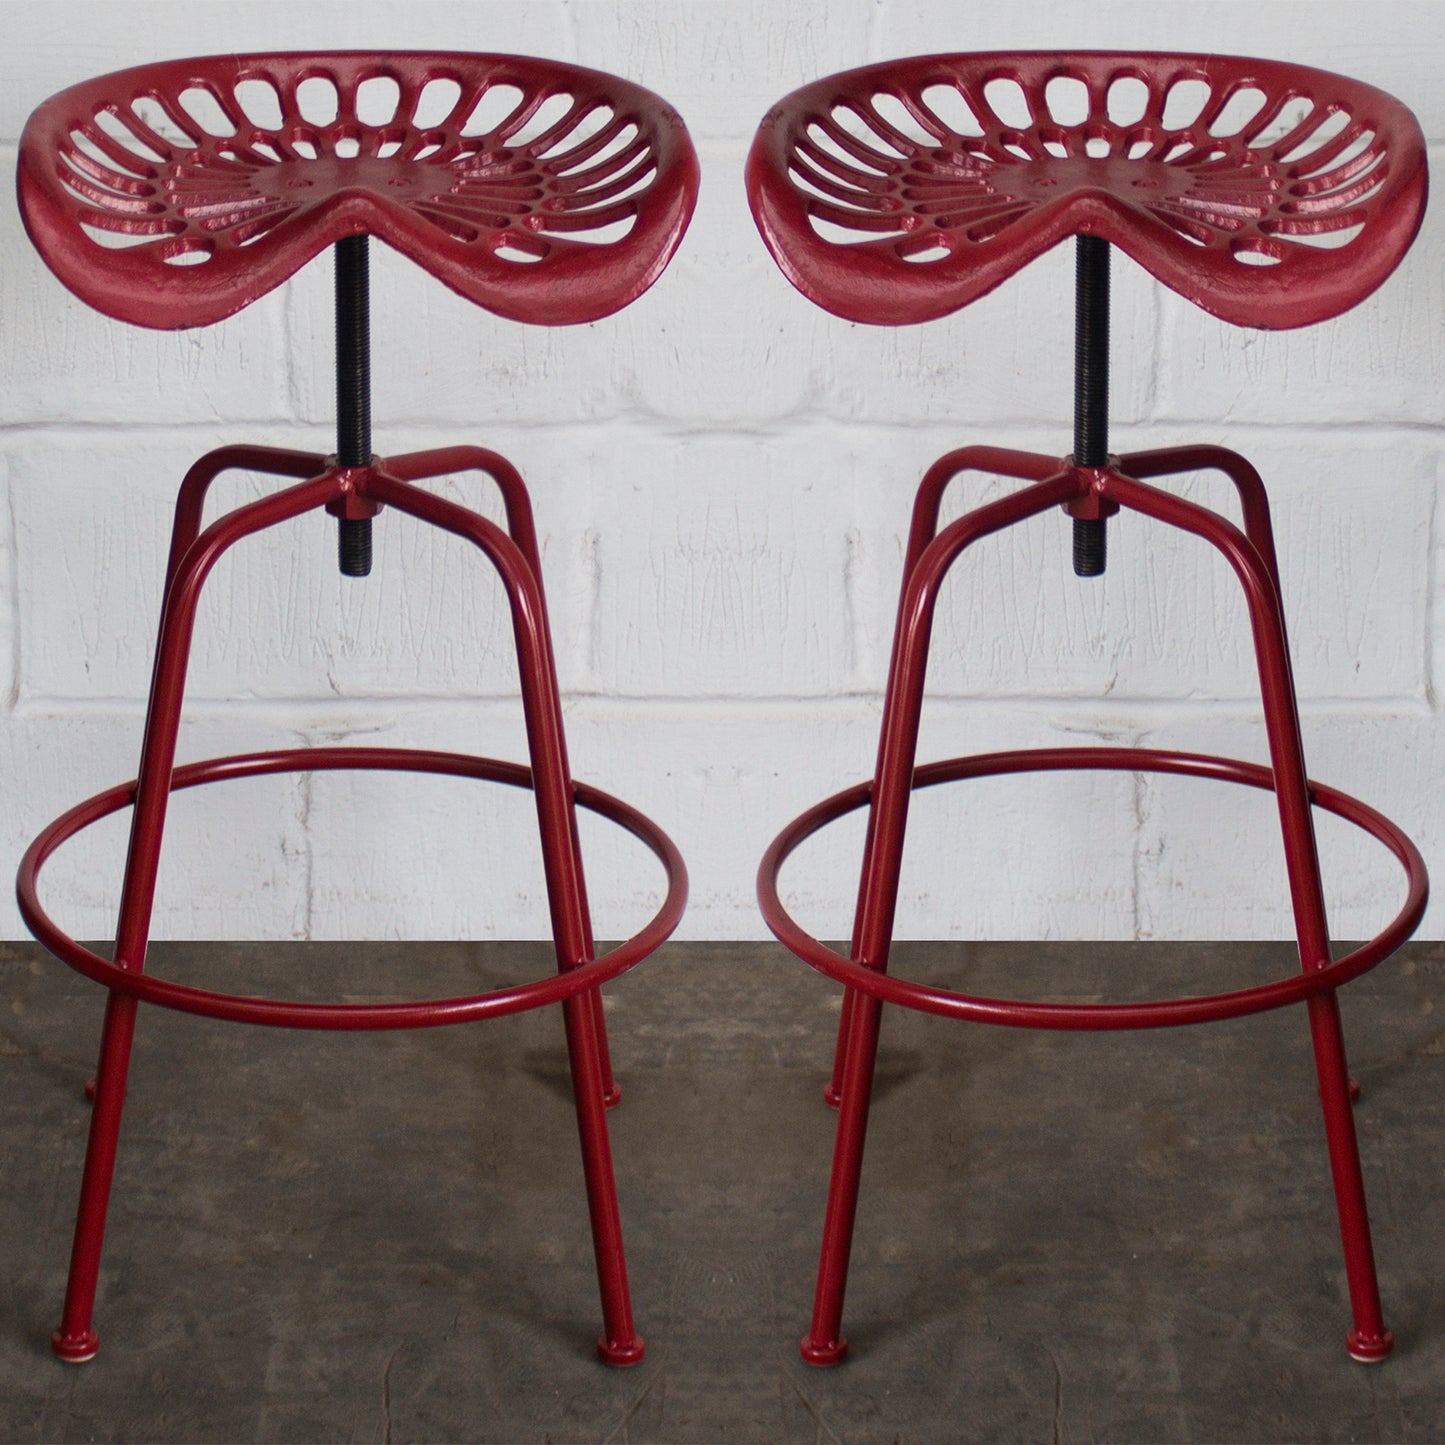 Arezzo Tractor Bar Stools - Red